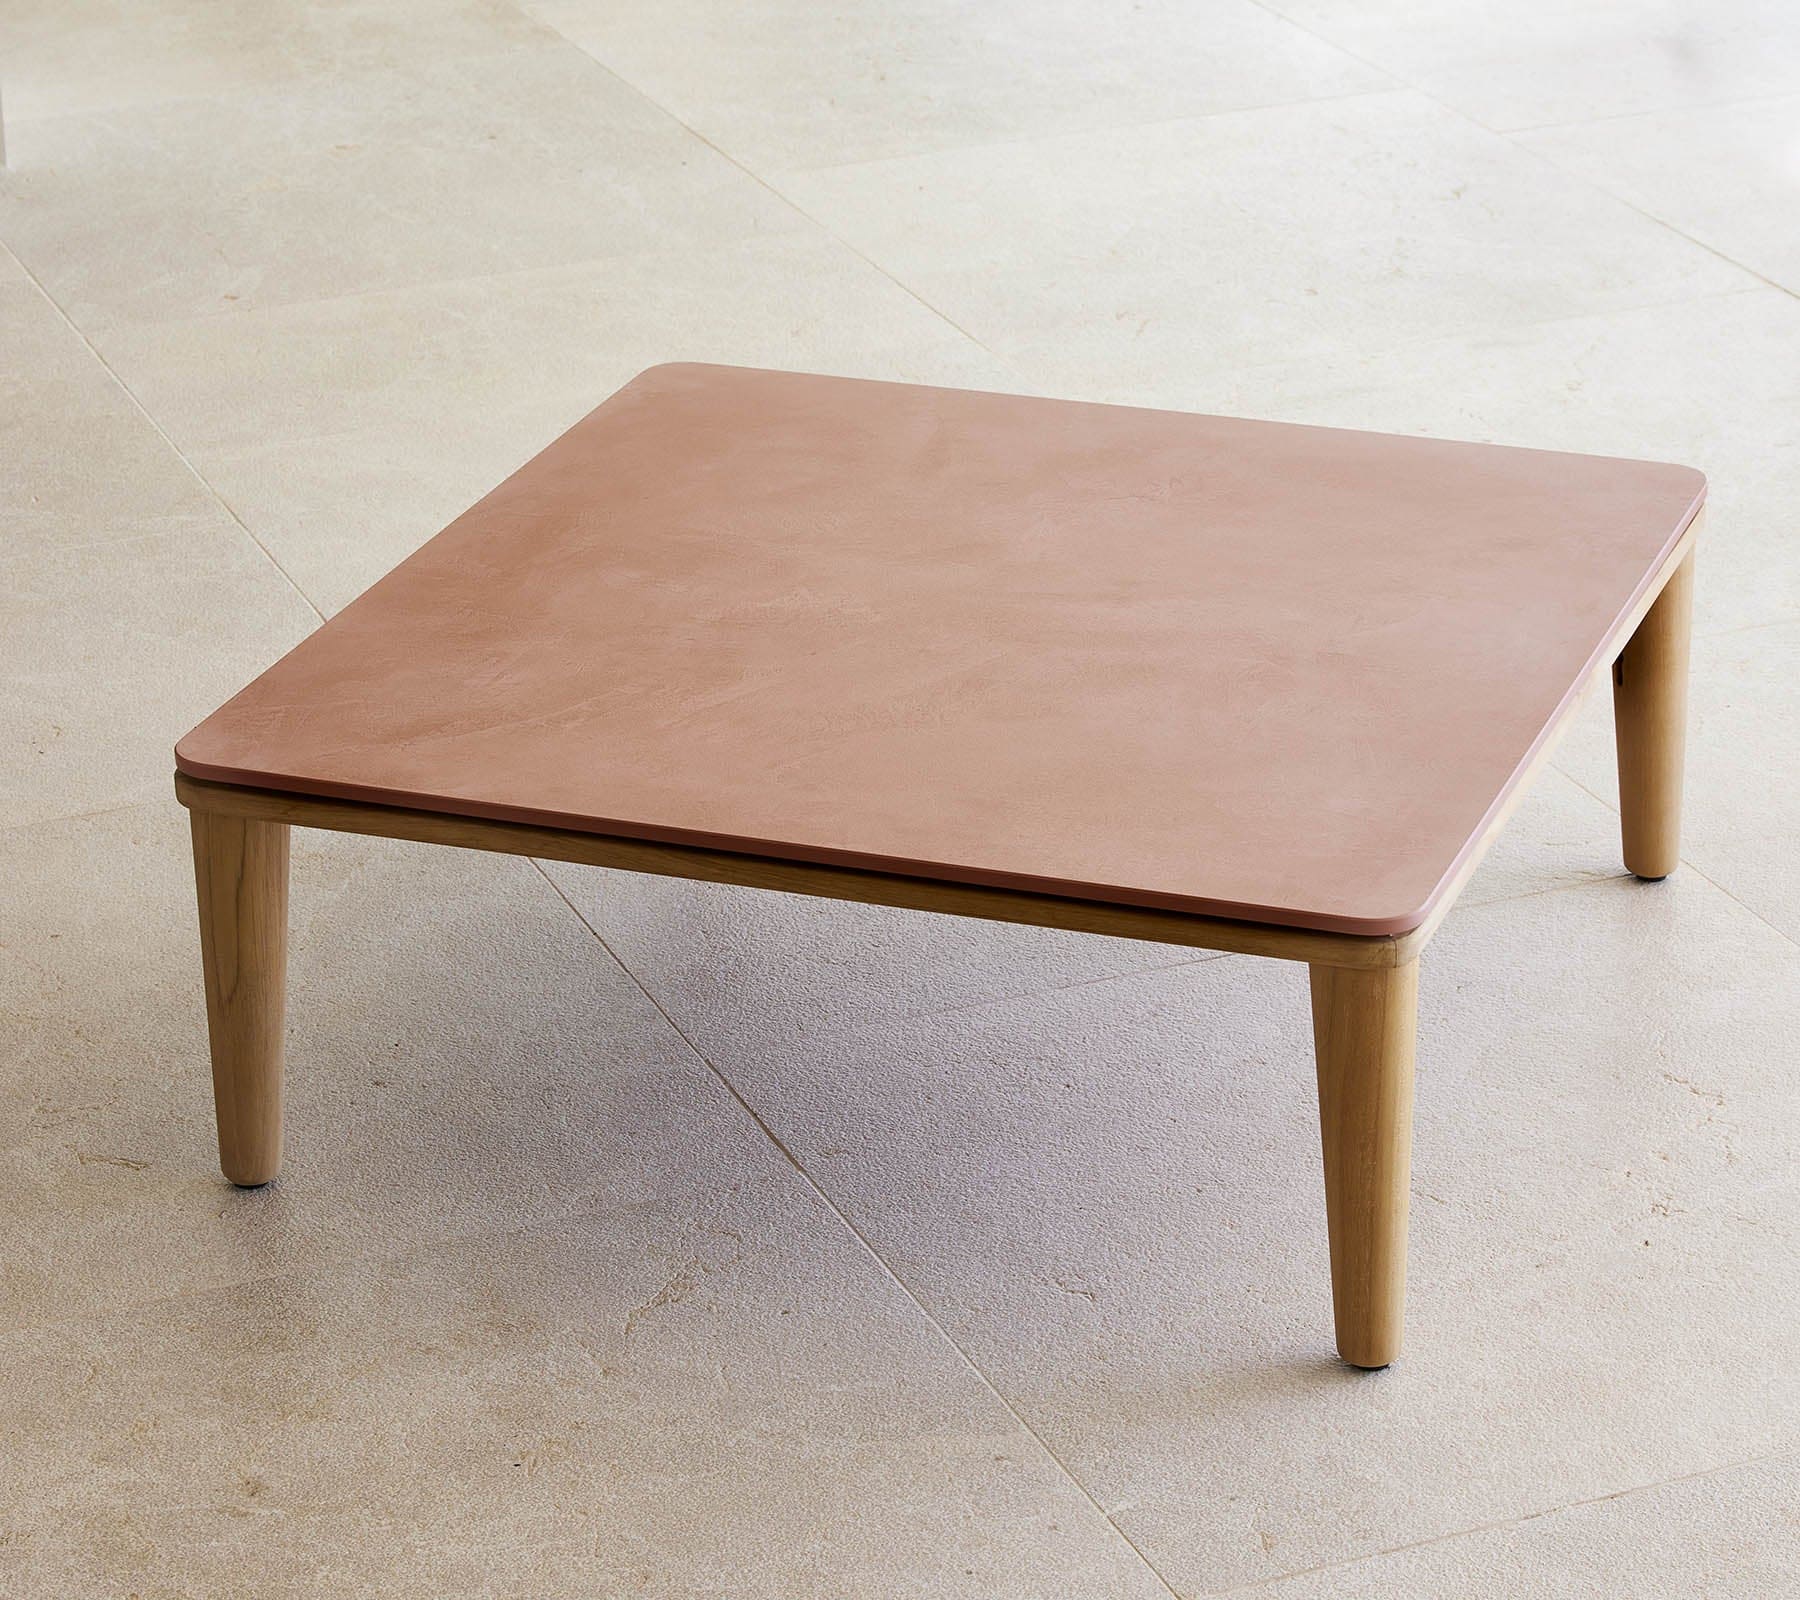 Boxhill's Capture Outdoor Coffee Table Terracotta Top Solo image